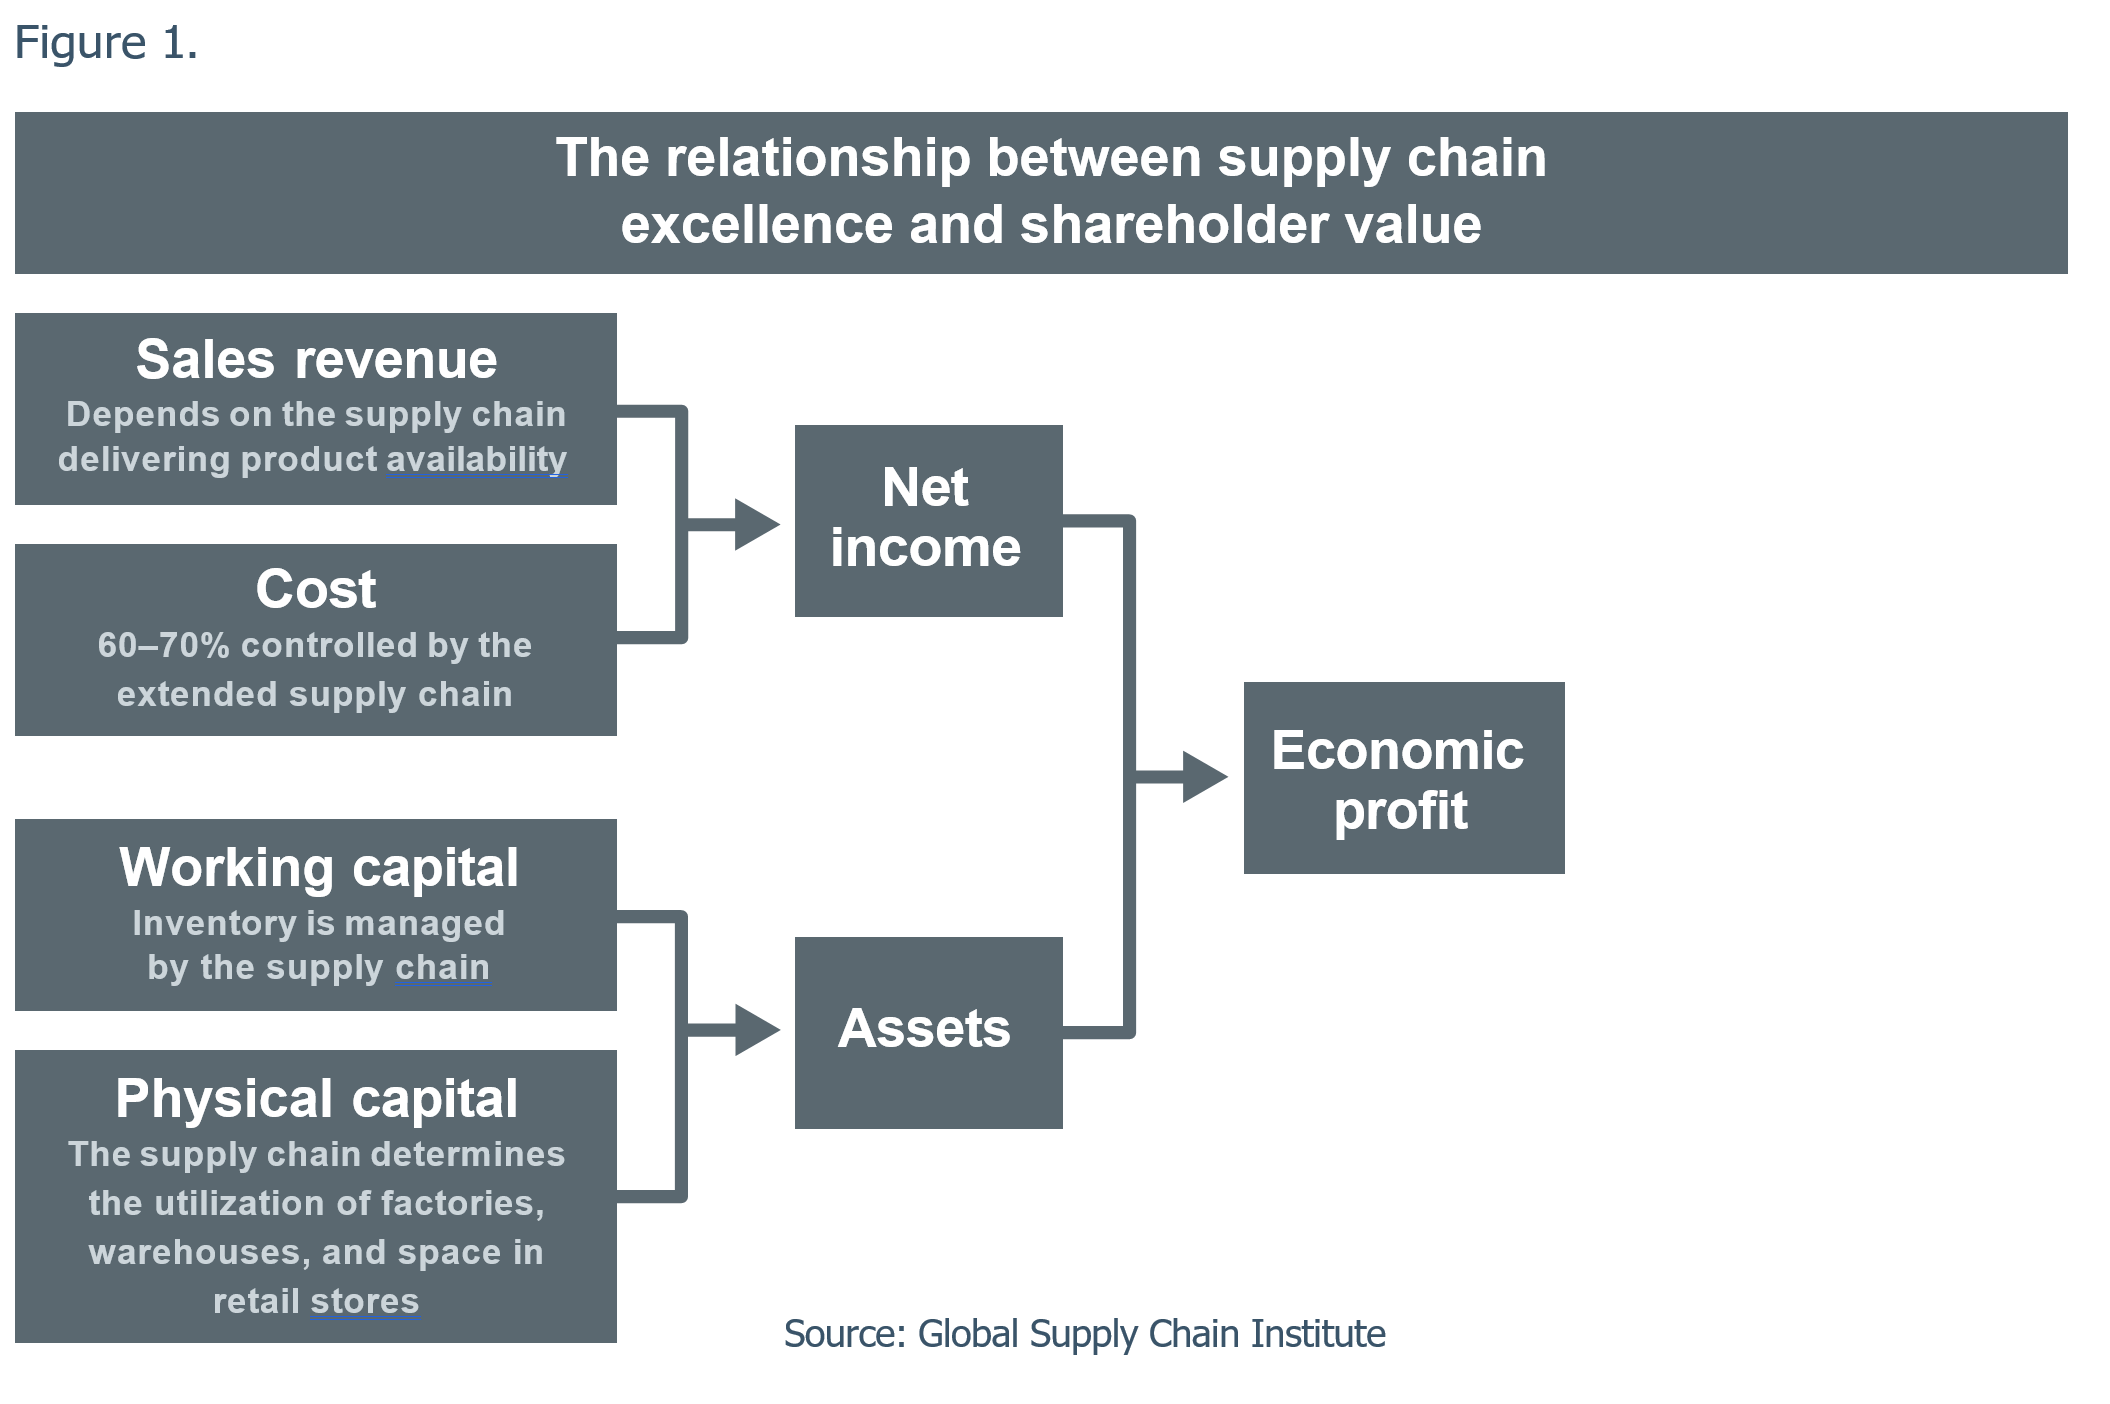 Figure 1: The relationship between supply chain excellence and shareholder value